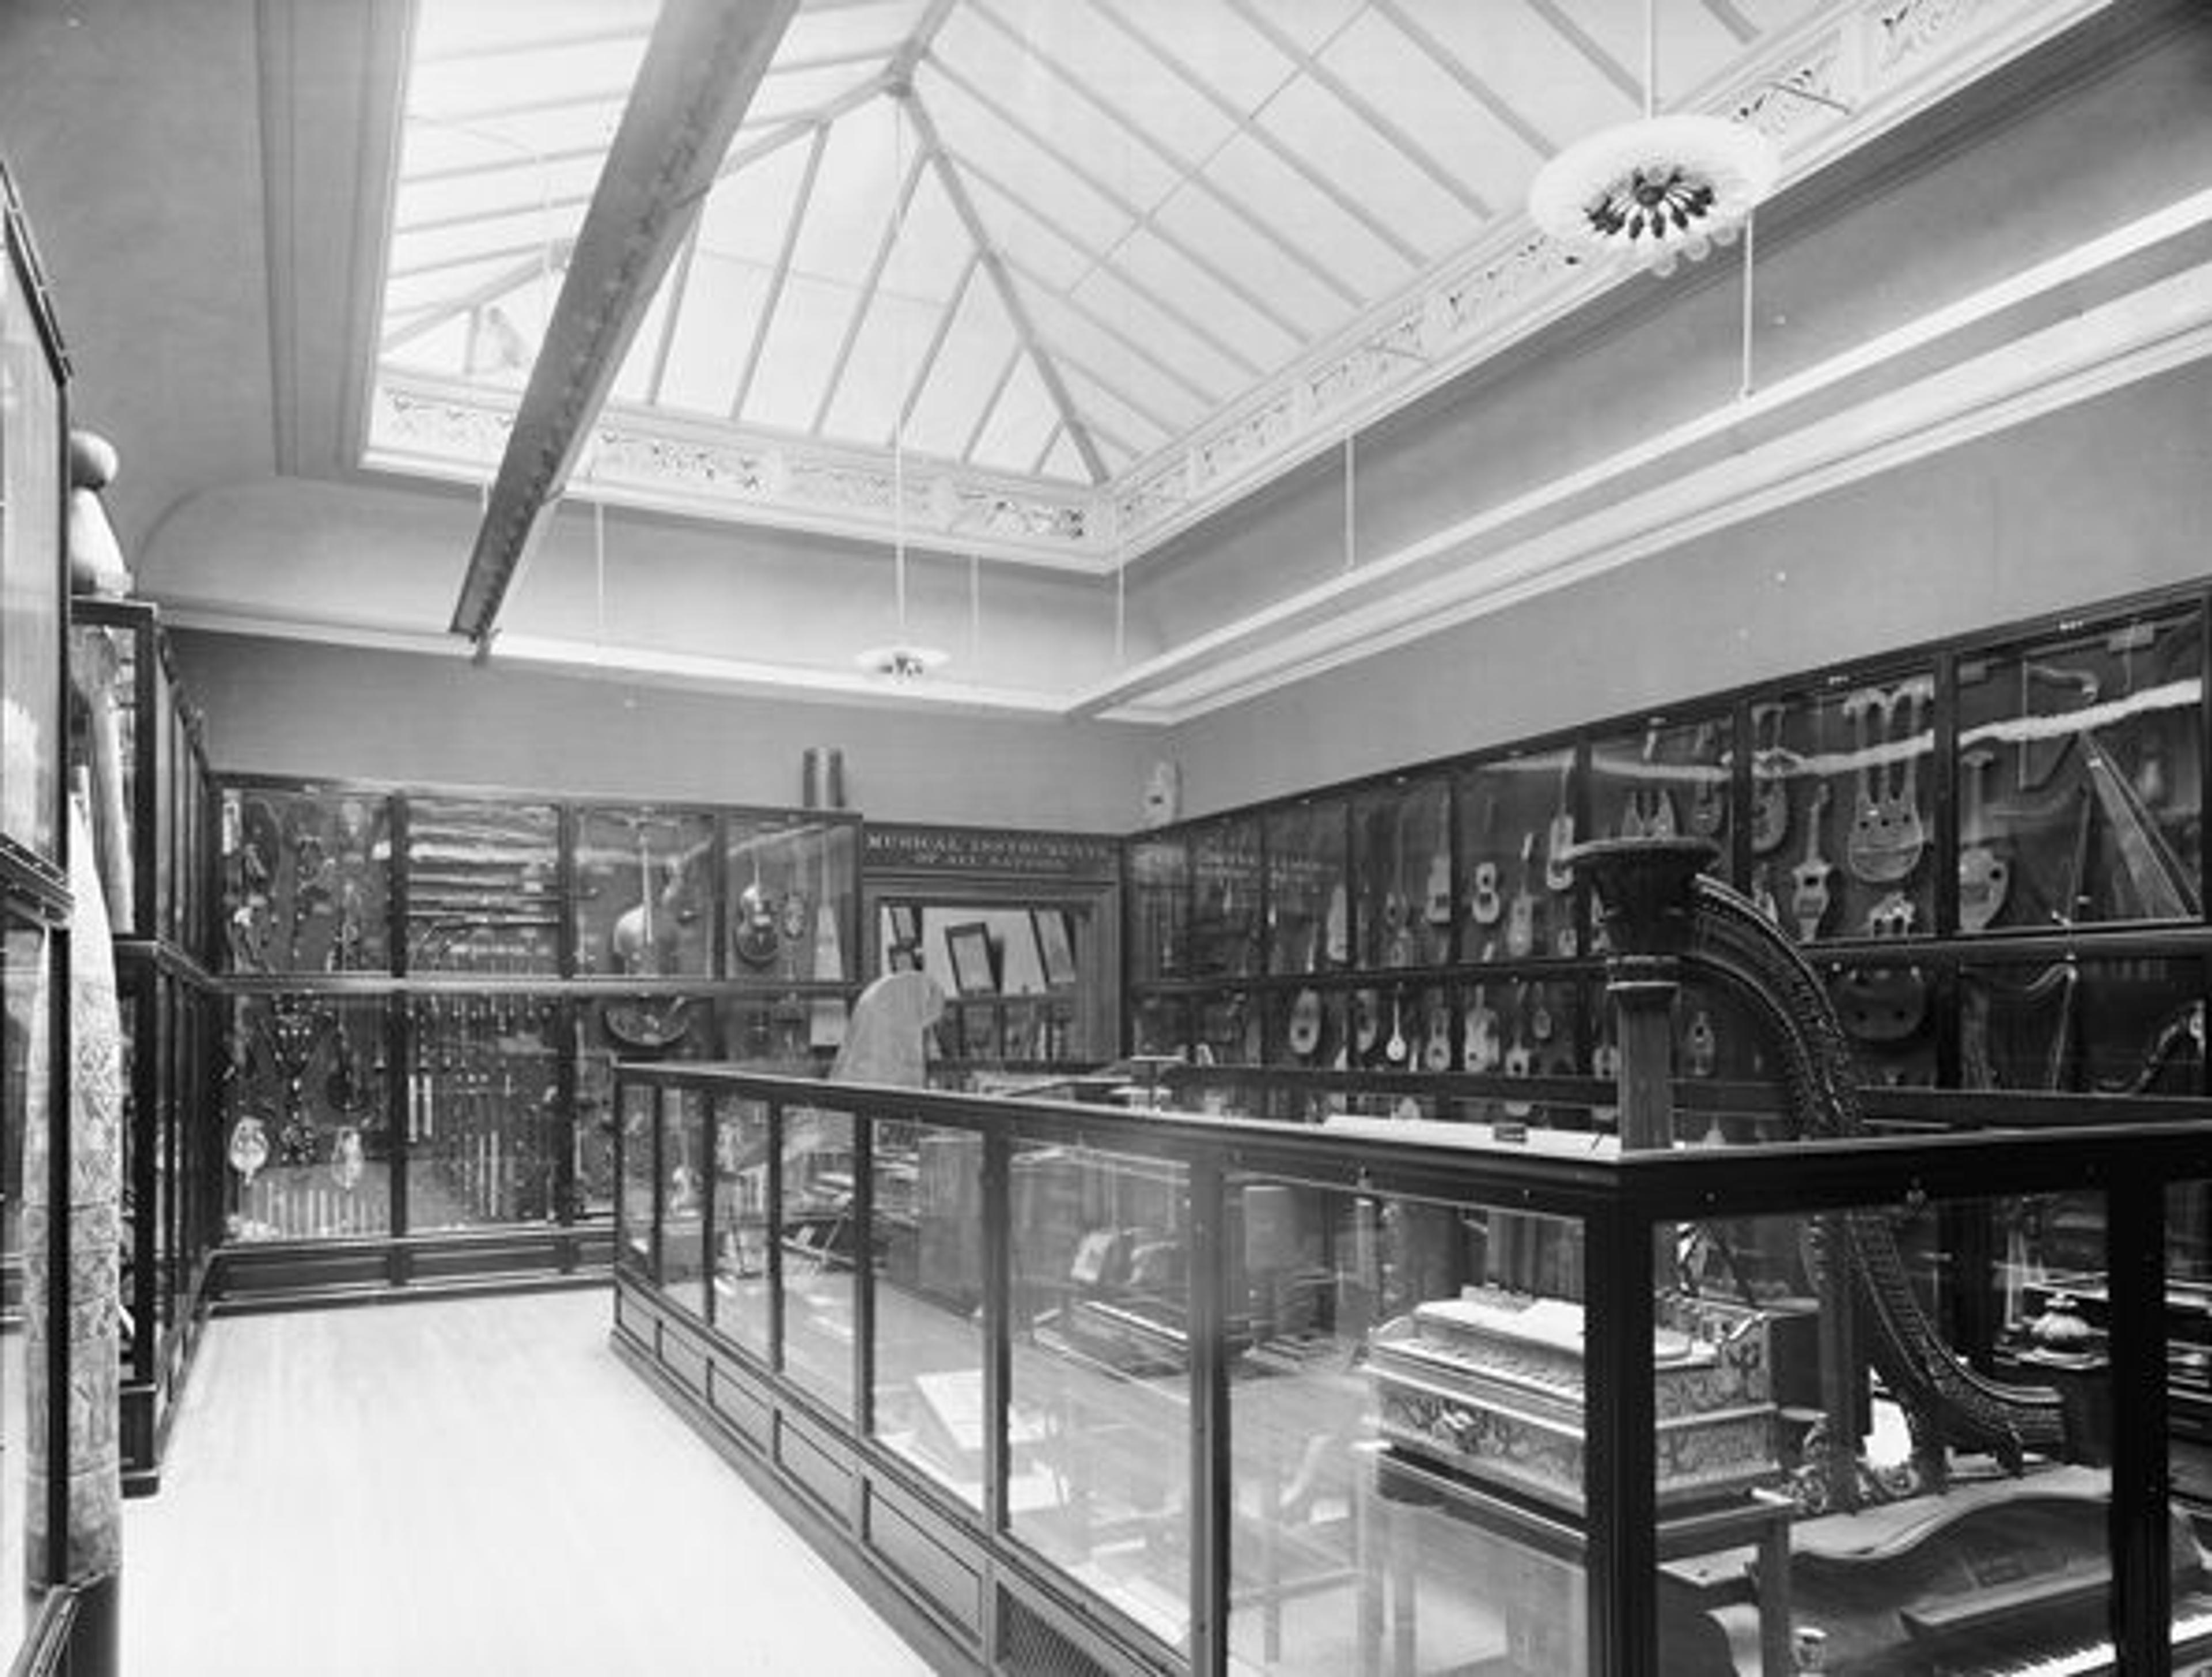 Musical Instruments galleries, as they appeared from 1896 to 1913